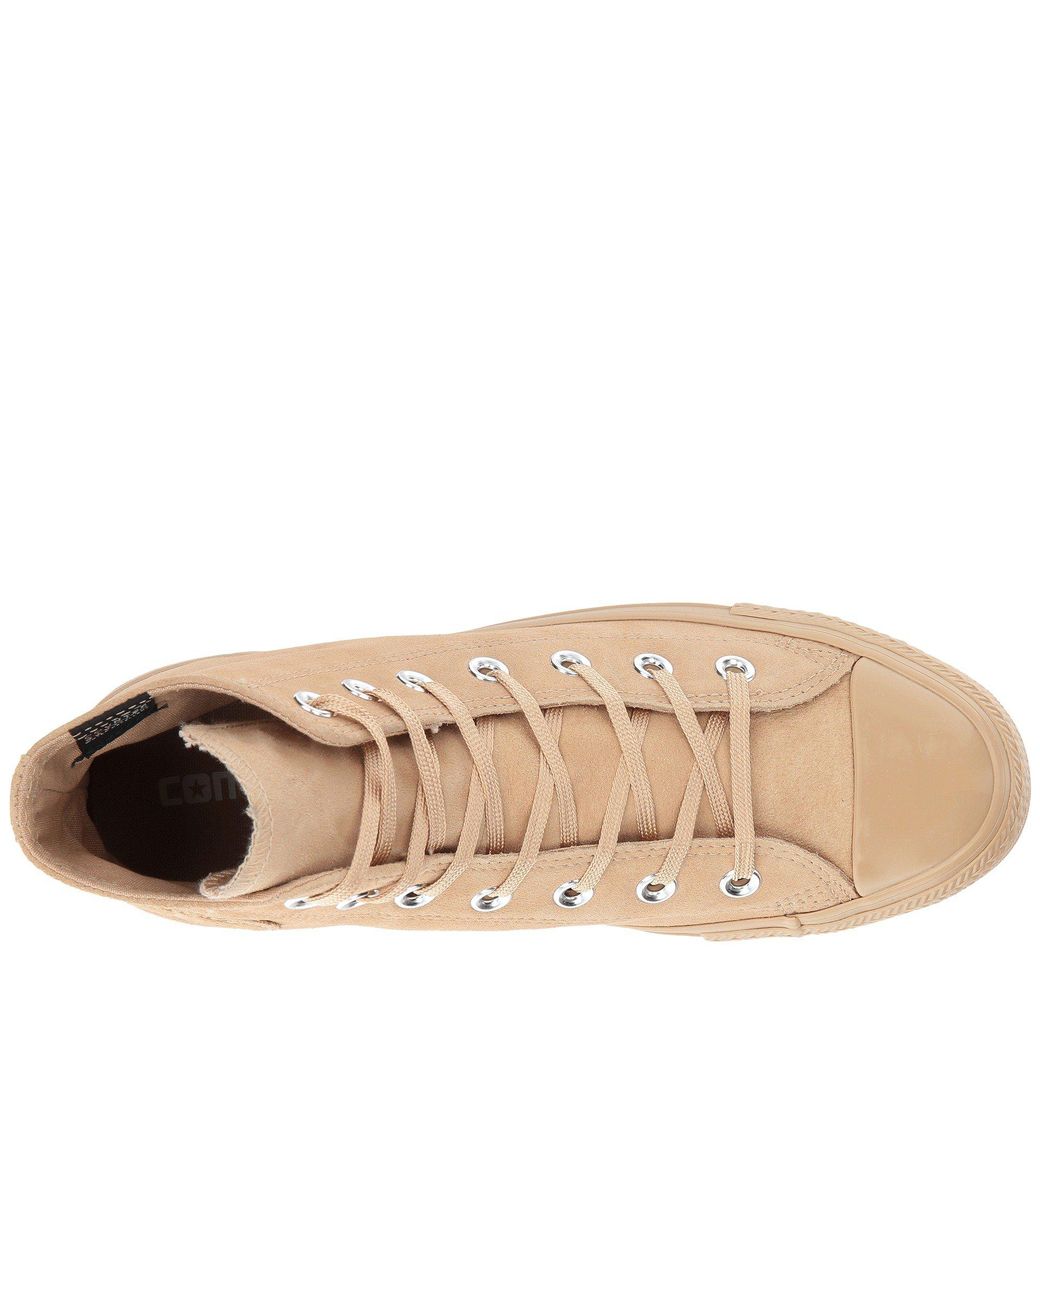 Converse Chuck Taylor All Star - Mono Plush Suede Hi in Natural | Lyst